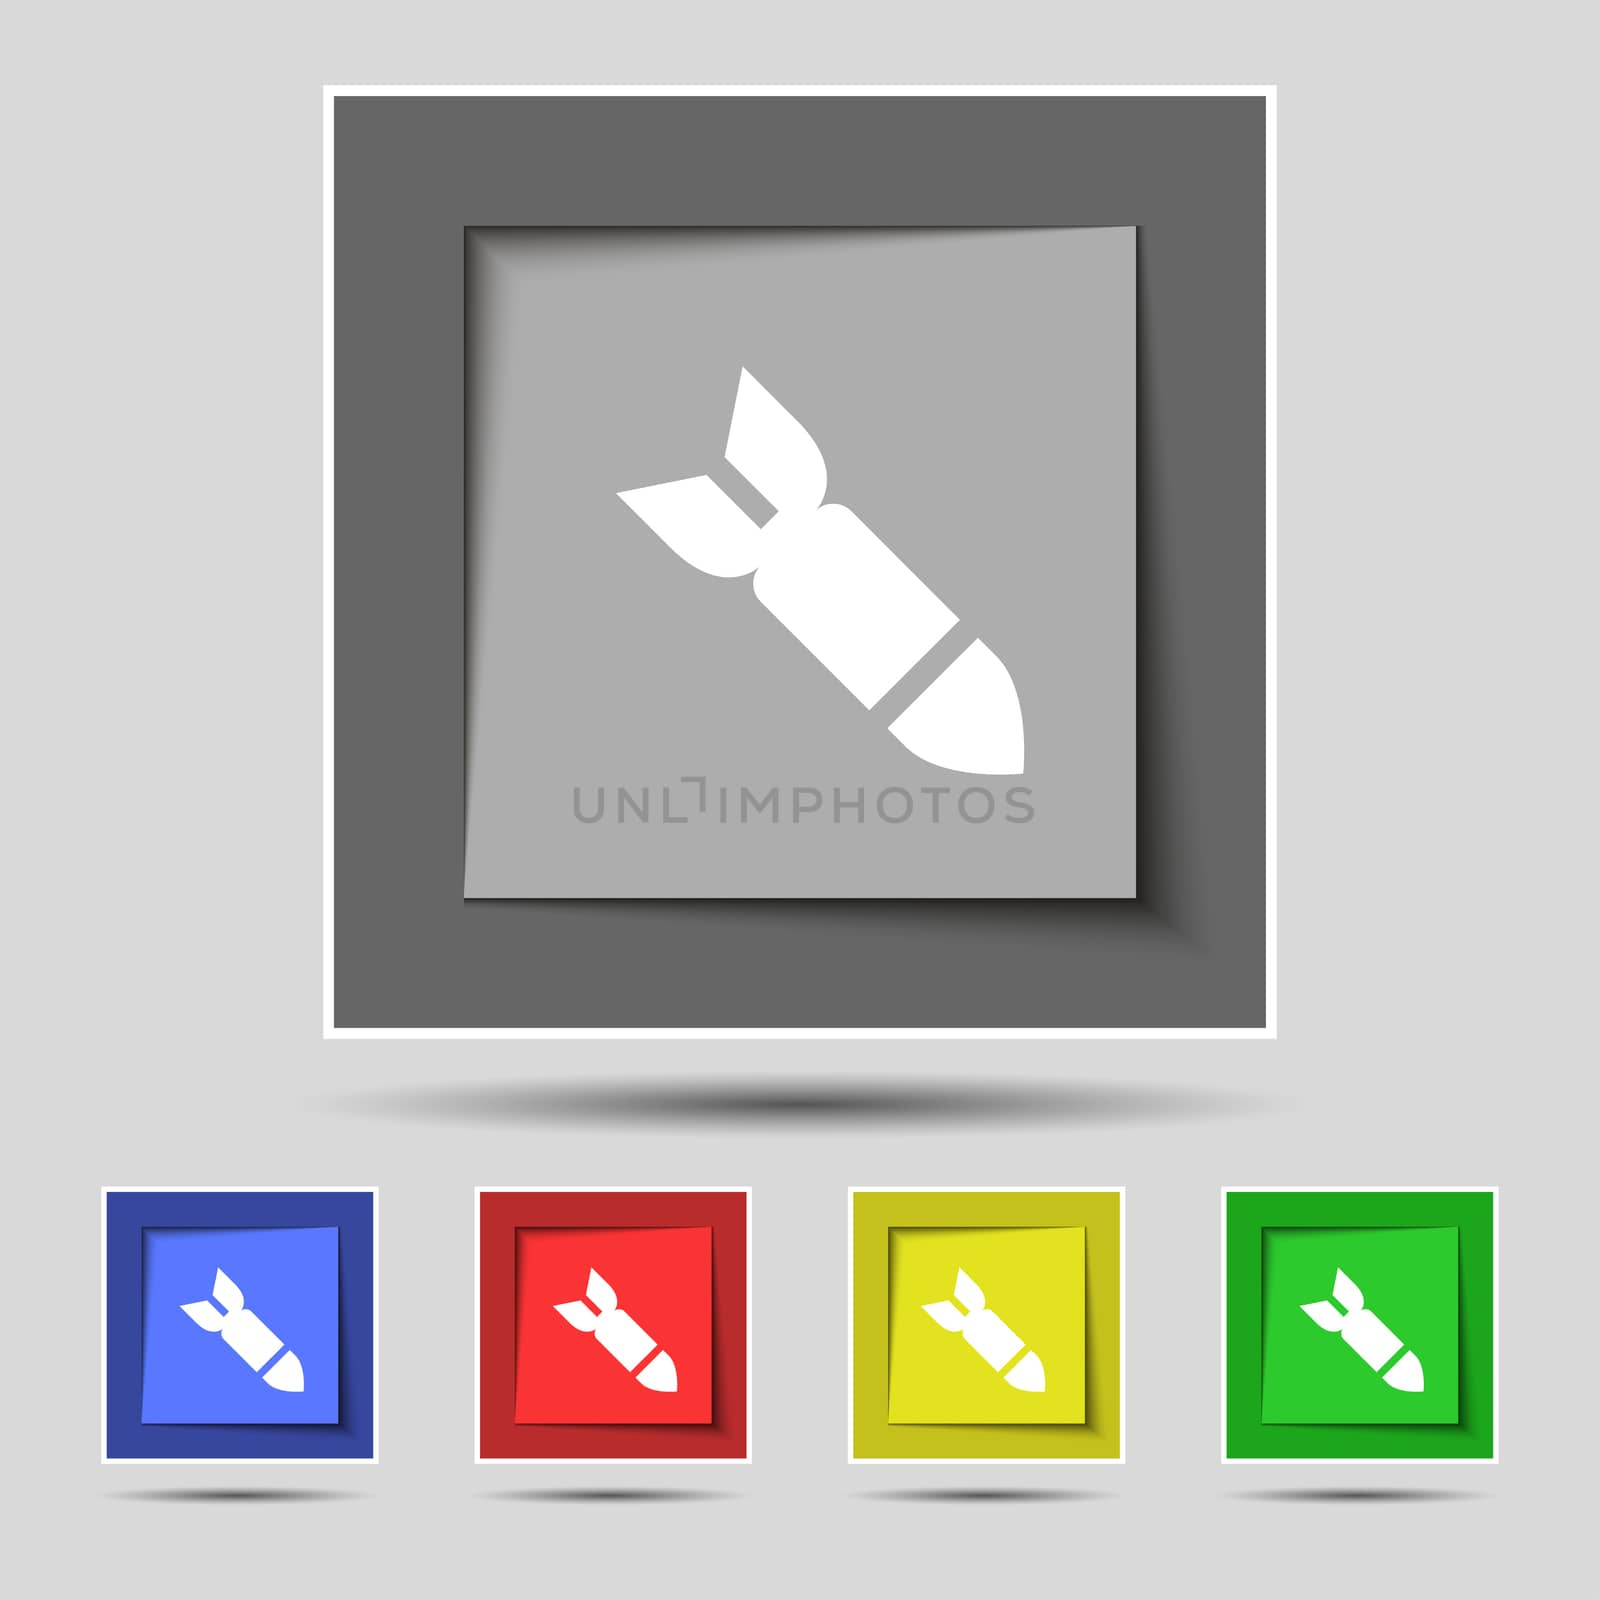 Missile,Rocket weapon icon sign on the original five colored buttons. illustration